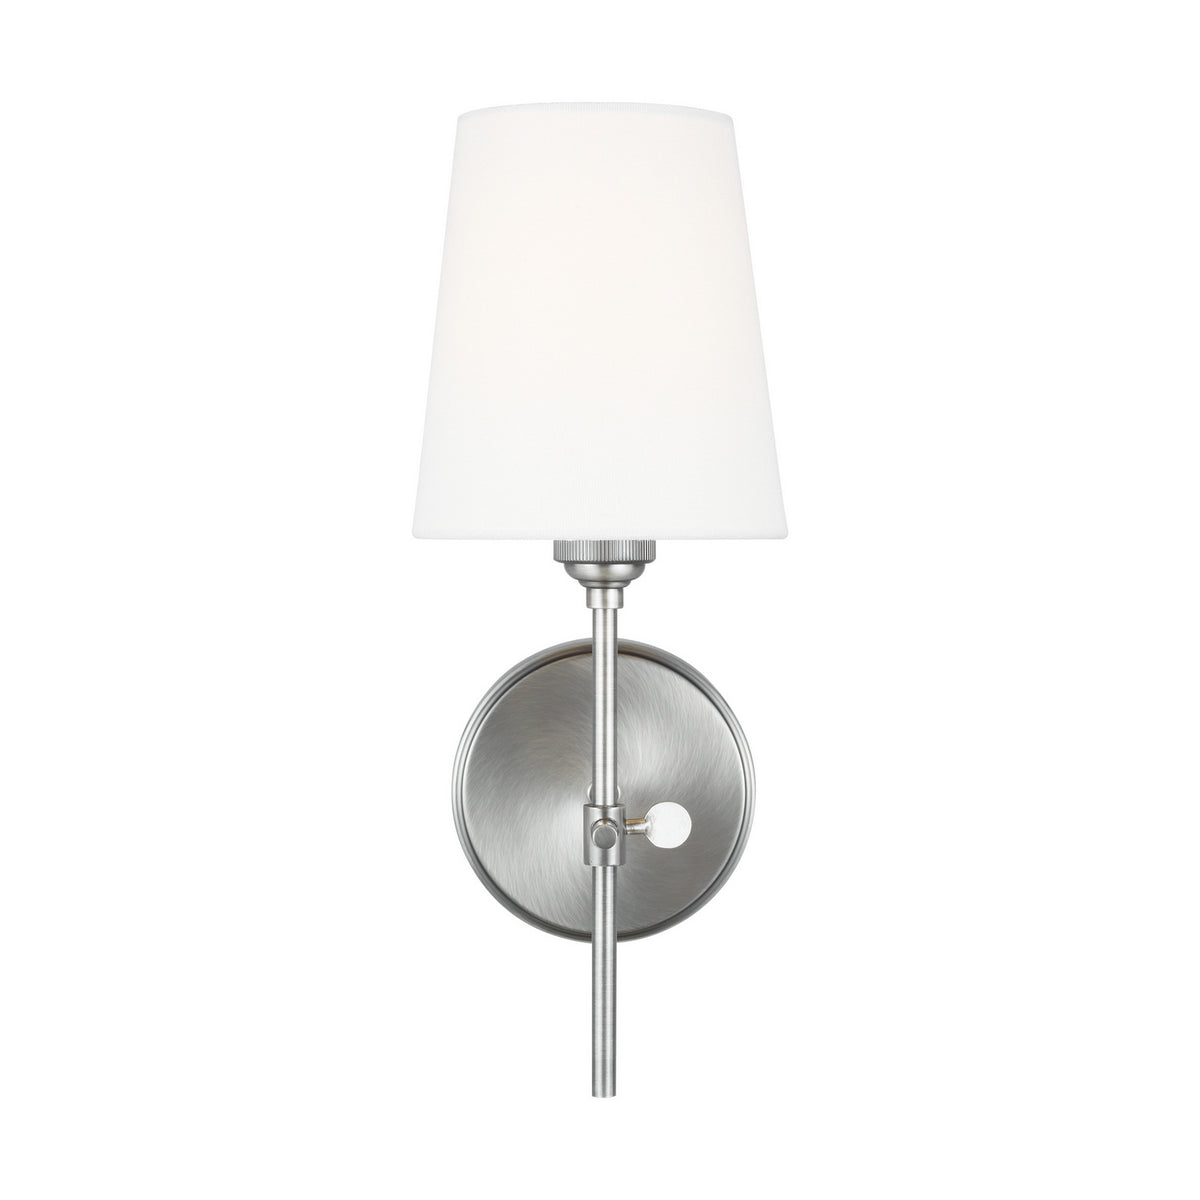 Visual Comfort Studio Canada - 4187201-965 - One Light Wall / Bath Sconce - Baker - Antique Brushed Nickel